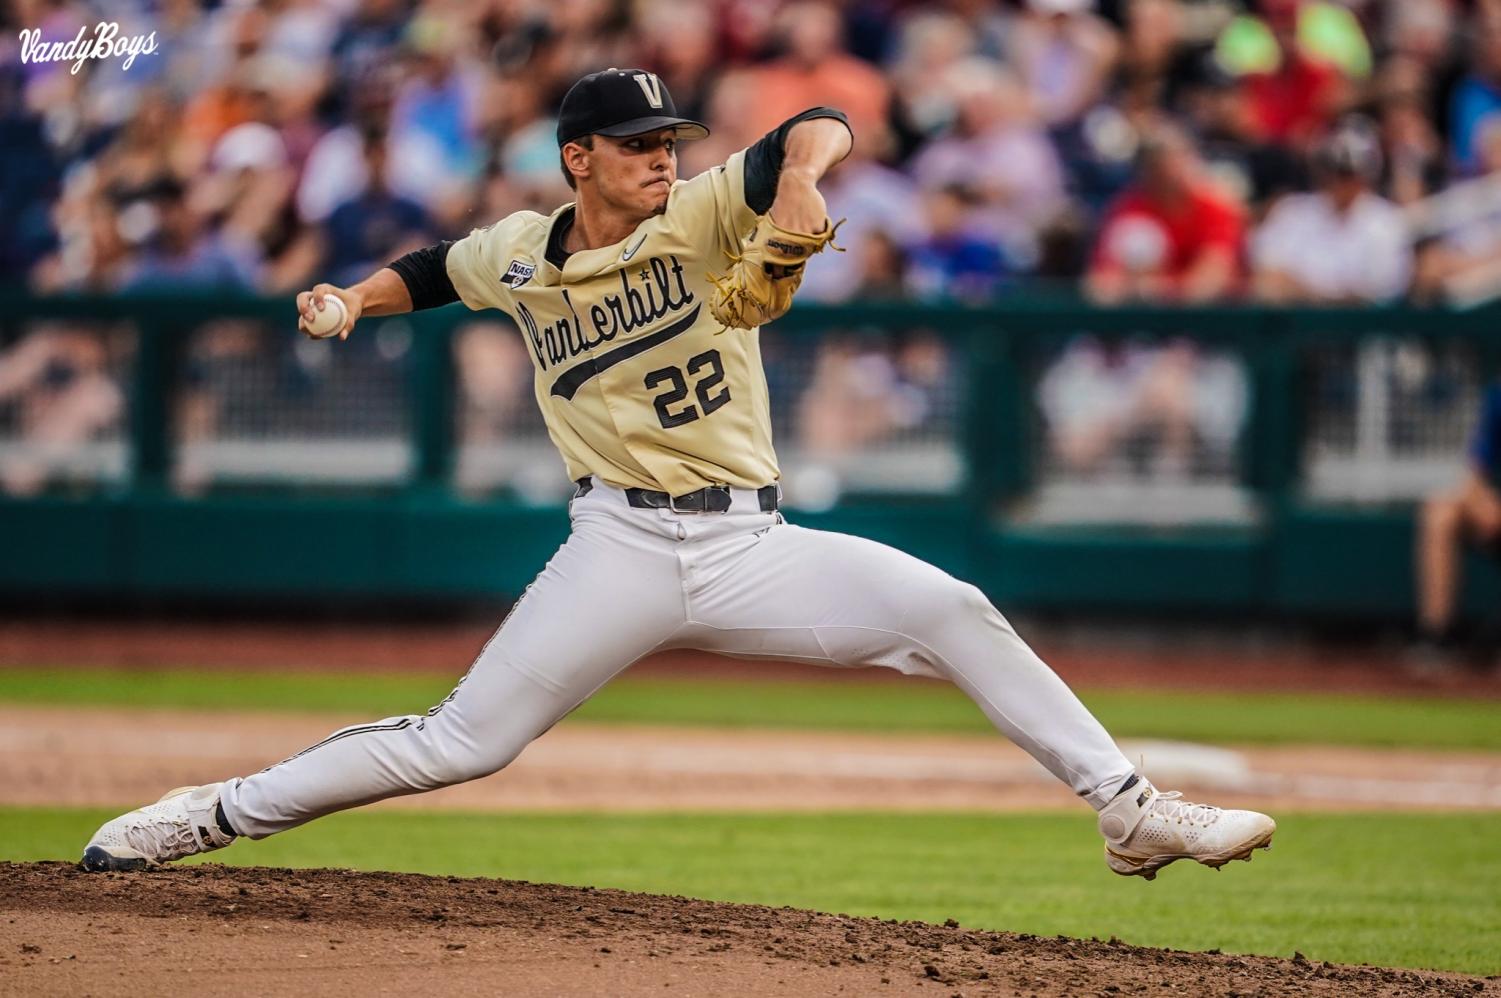 2021 MLB Draft: Jack Leiter drafted second overall by the Texas